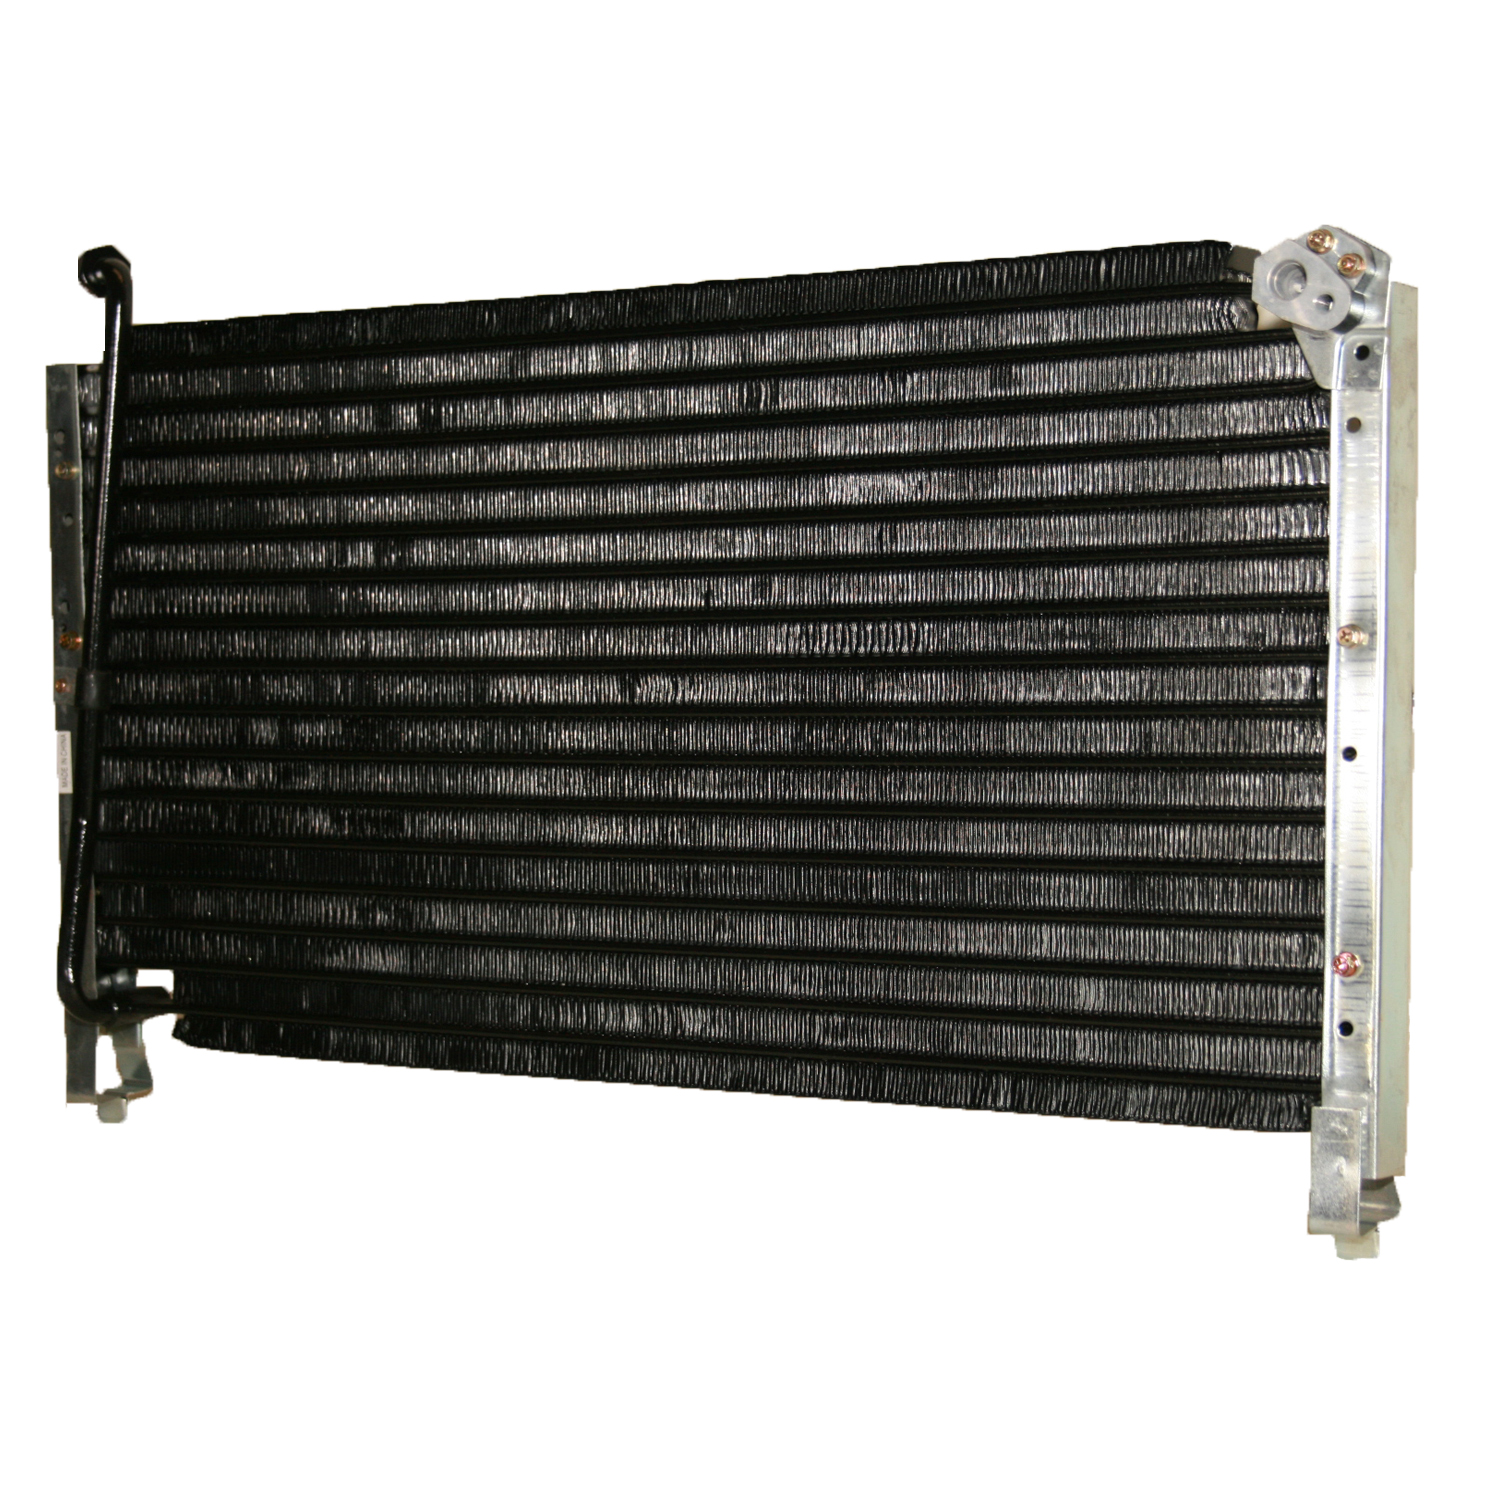 TCW Condenser 44-4390 New Product Image field_60b6a13a6e67c